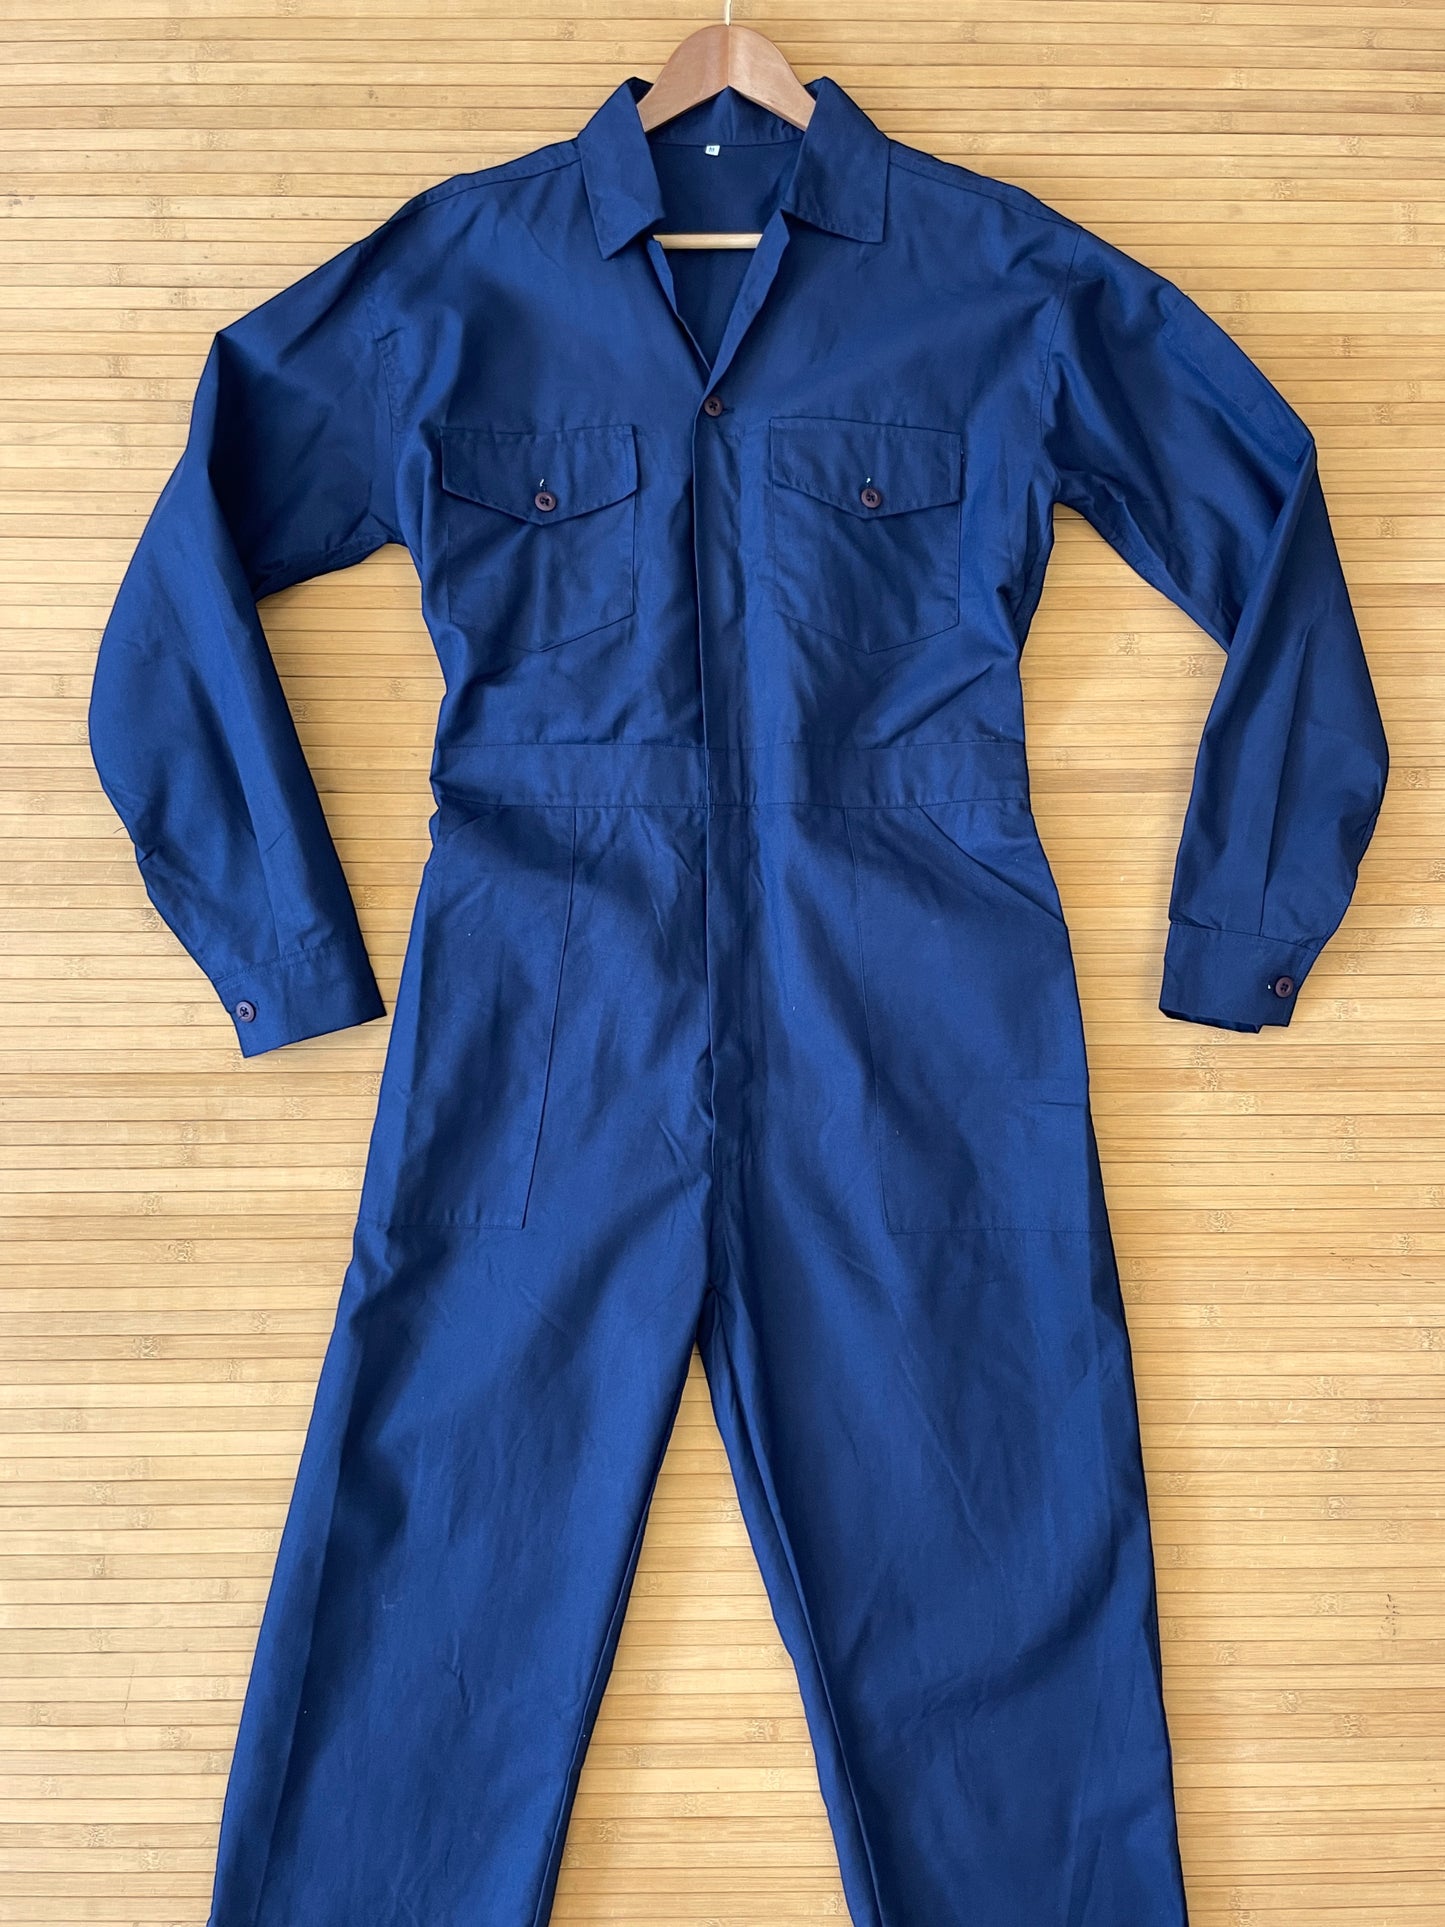 Vintage LL Bean Military Workwear Coveralls